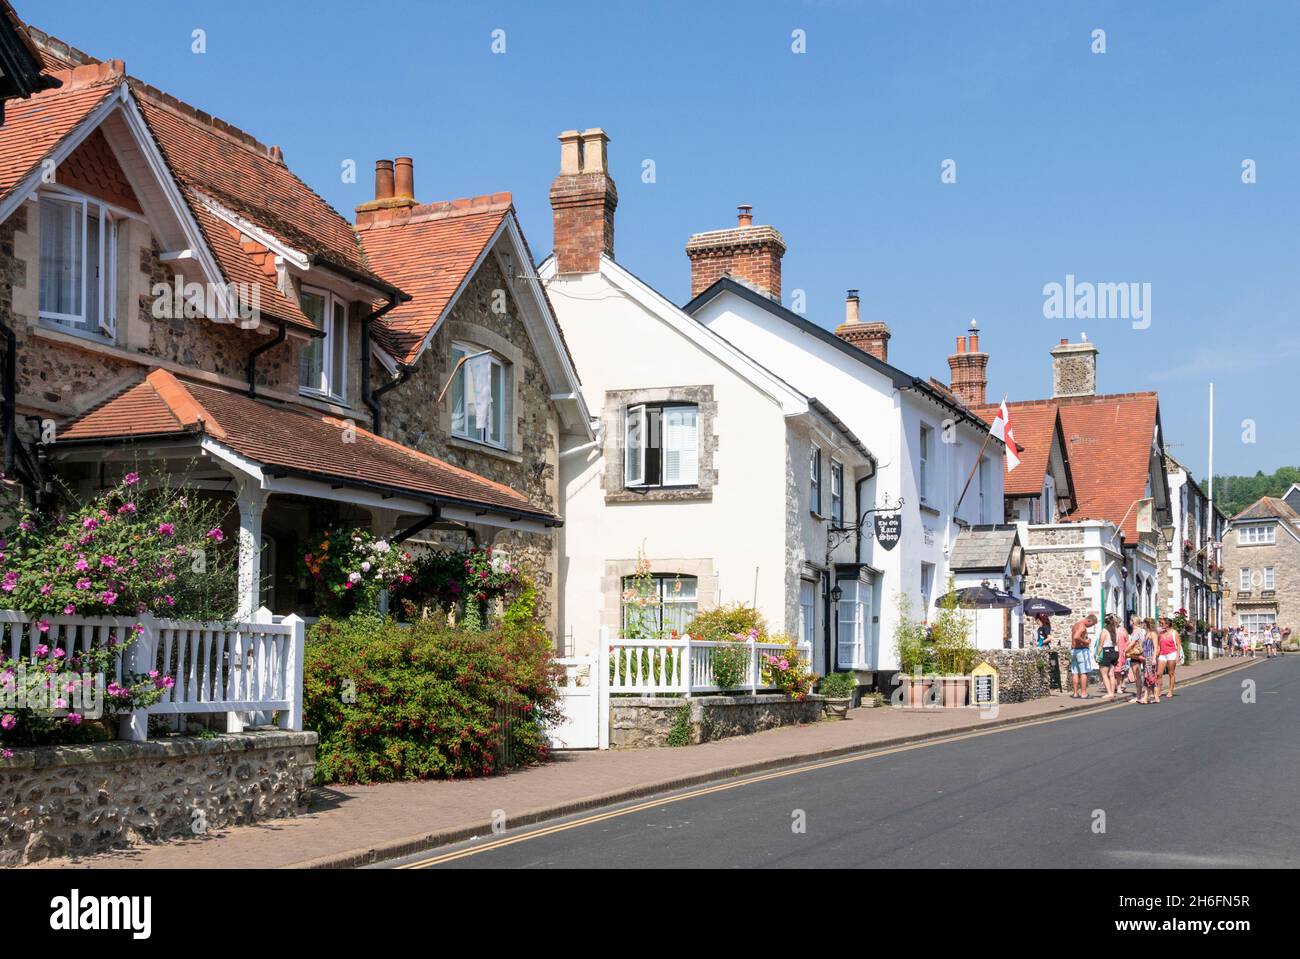 Traditionally built houses with small gardens in front and the Barrel O Beer pub on Fore Street Beer Village centre Beer Devon England UK GB Europe Stock Photo